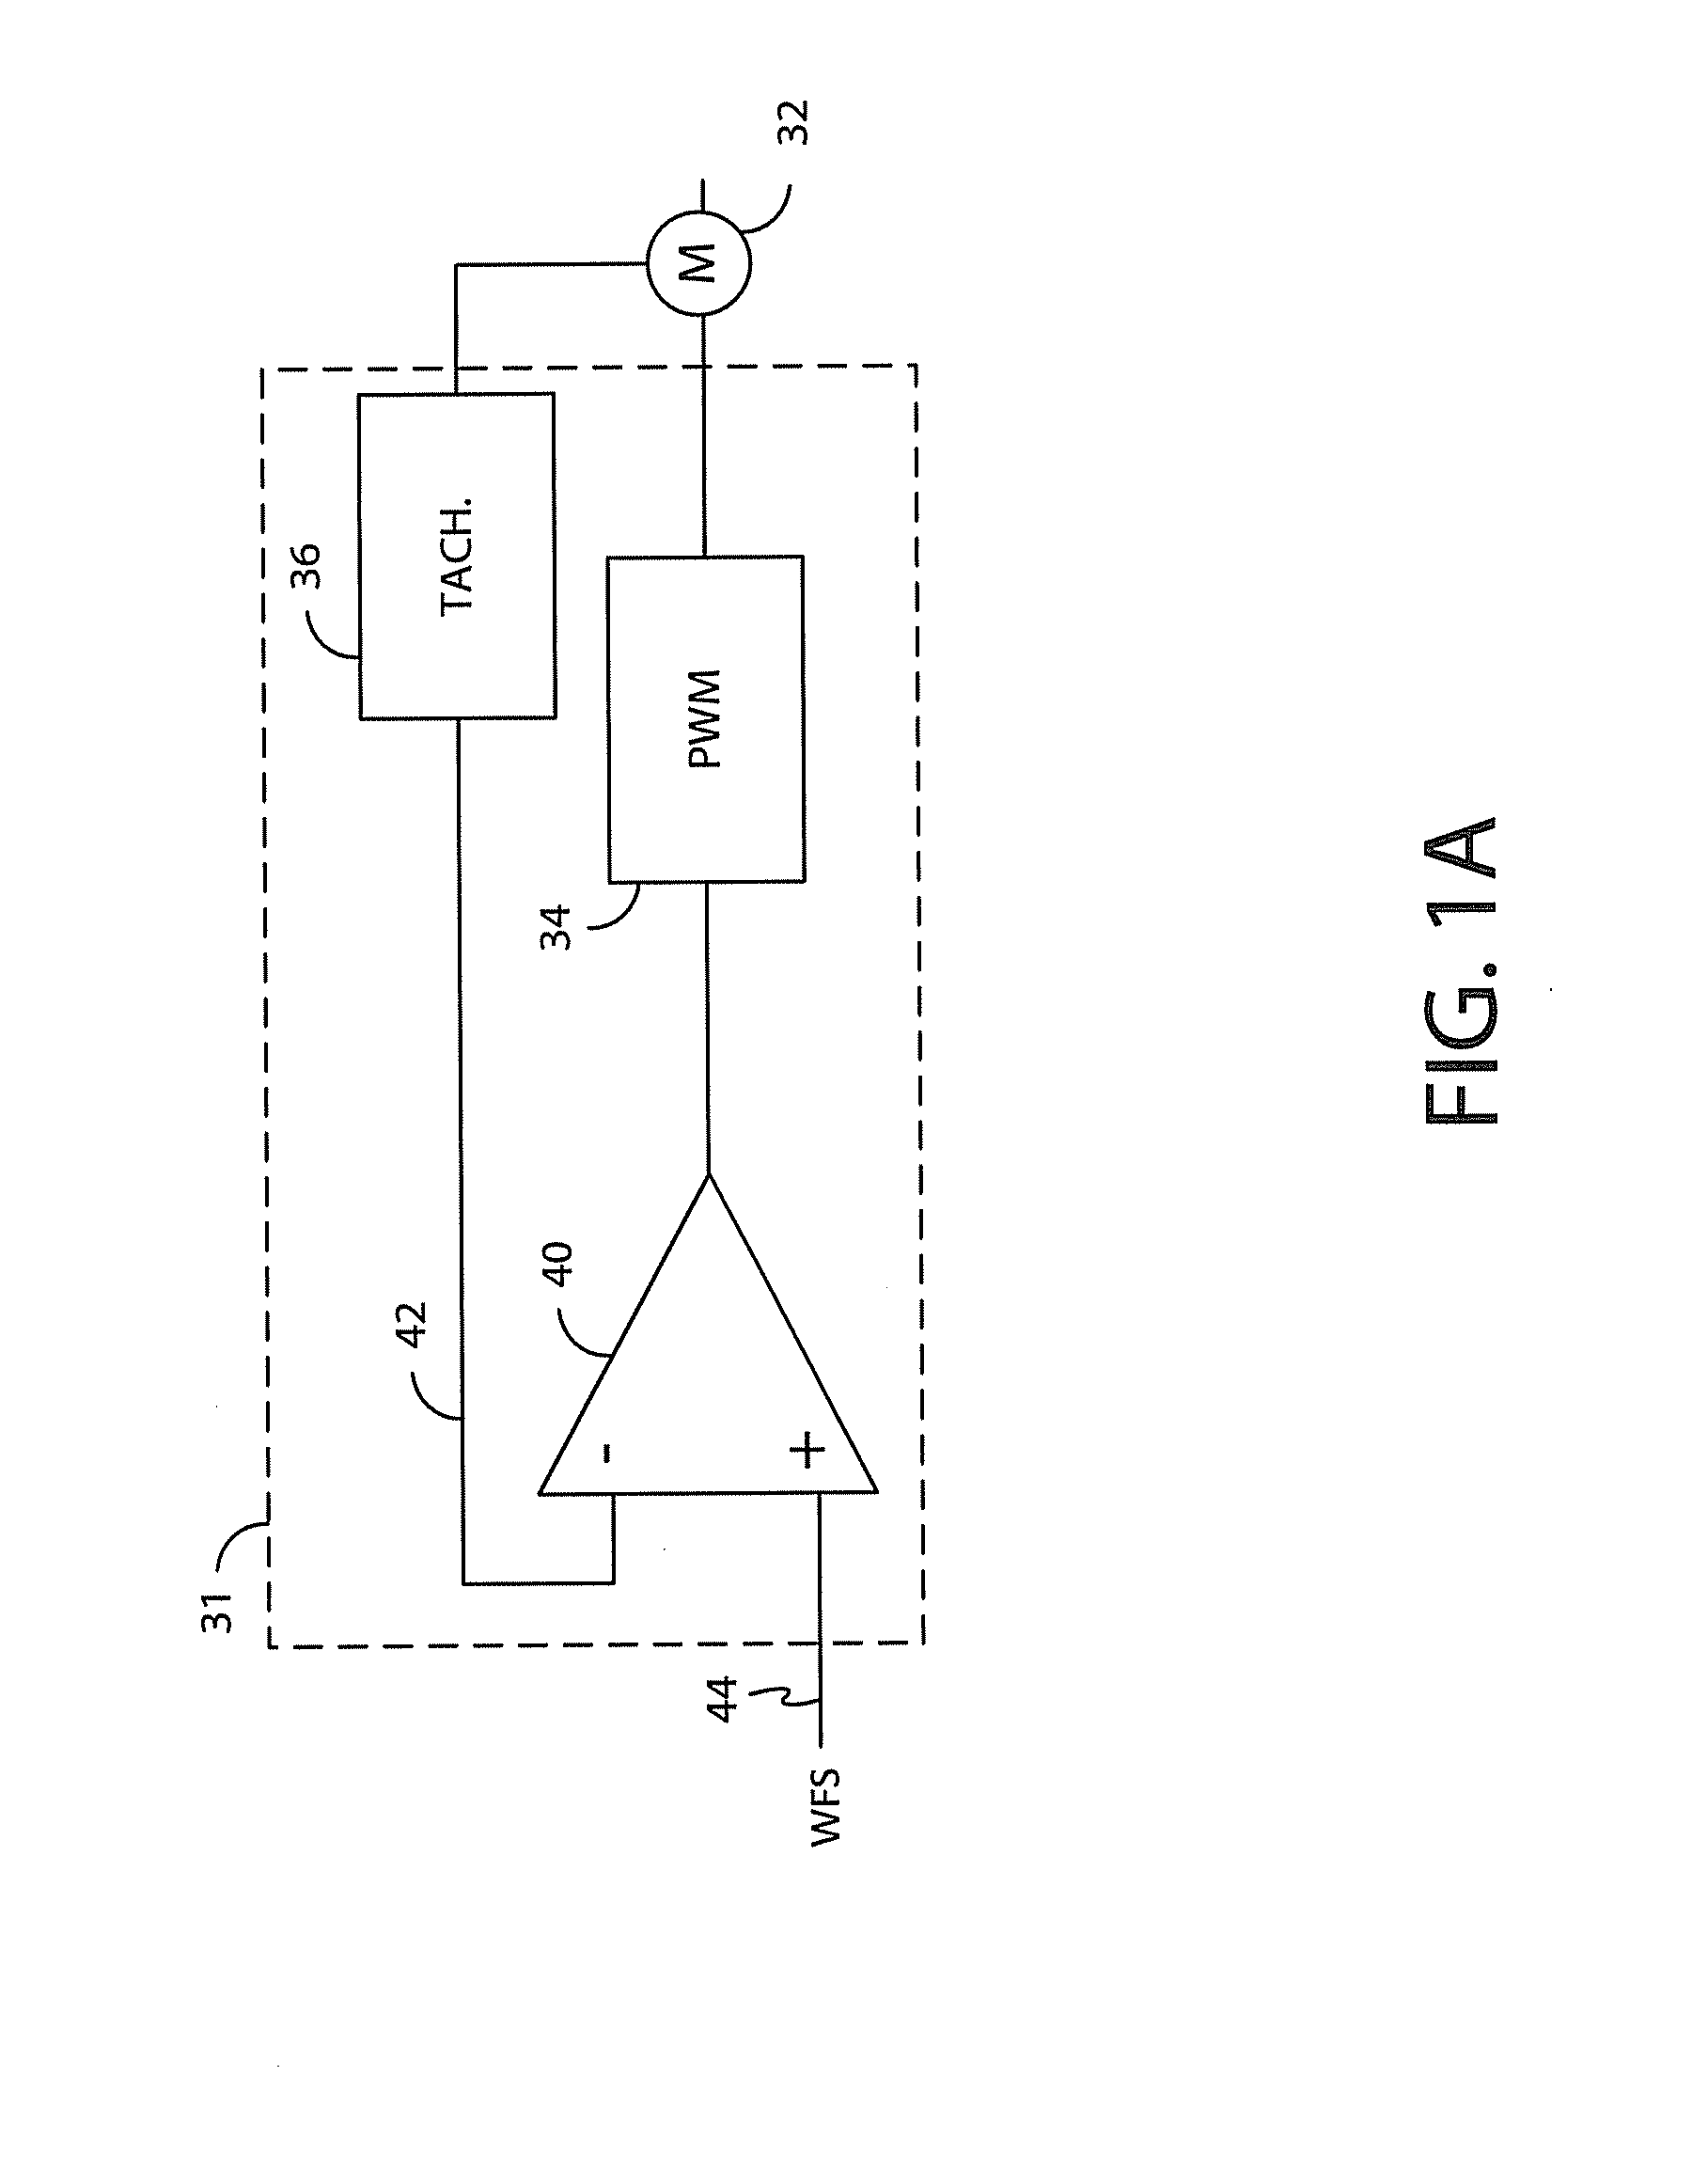 Electric arc welder using high frequency pulses and negative polarity